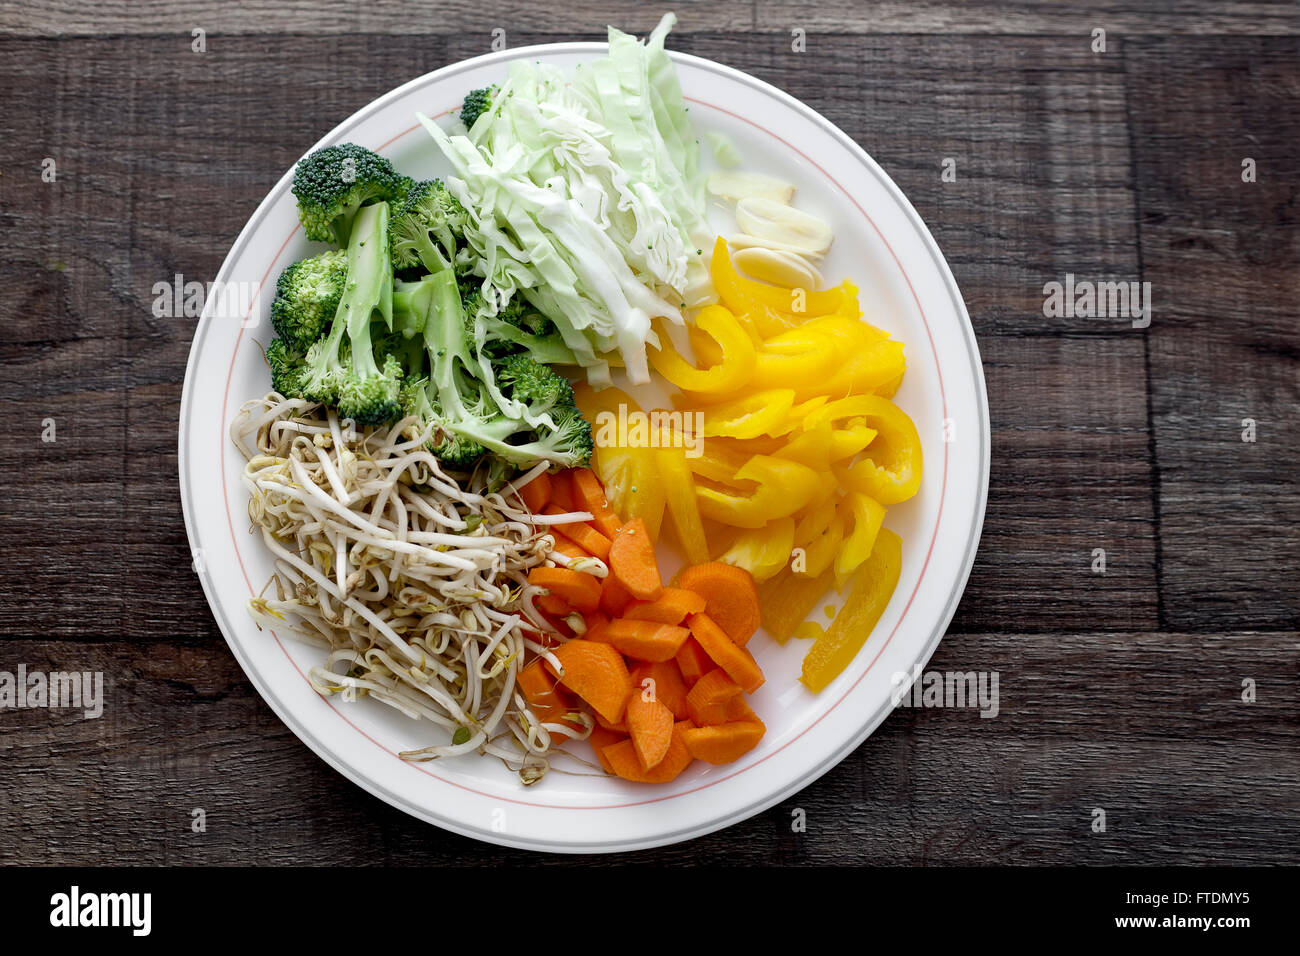 Sliced vegetables placed on the white plate. Stock Photo